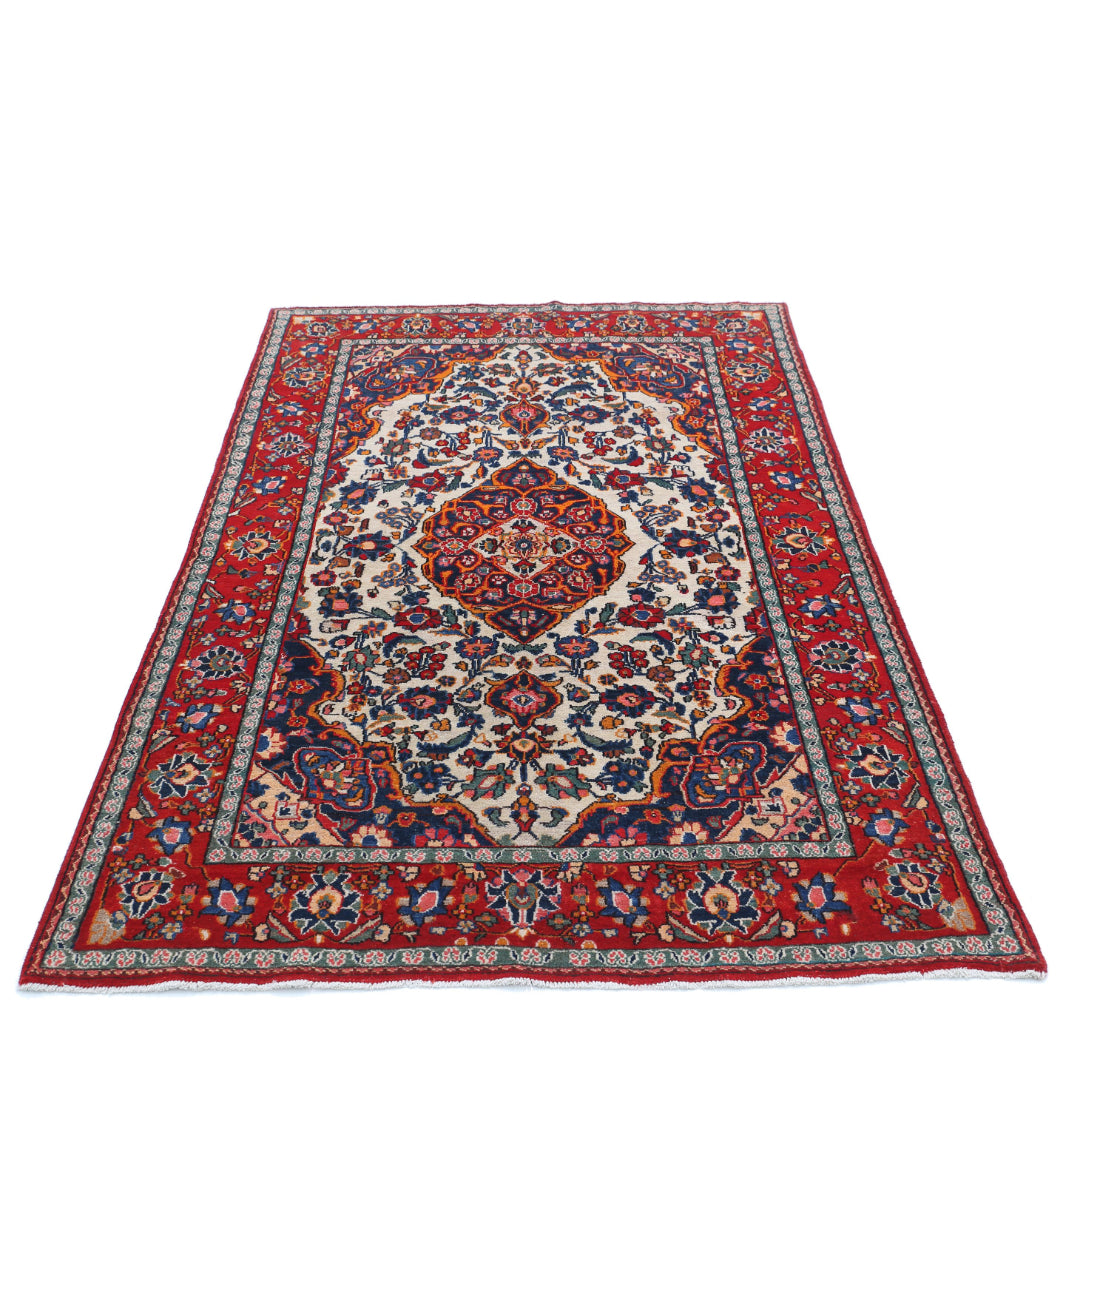 Hand Knotted Persian Navahand Wool Rug - 4'2'' x 6'8'' 4'2'' x 6'8'' (125 X 200) / Ivory / Red